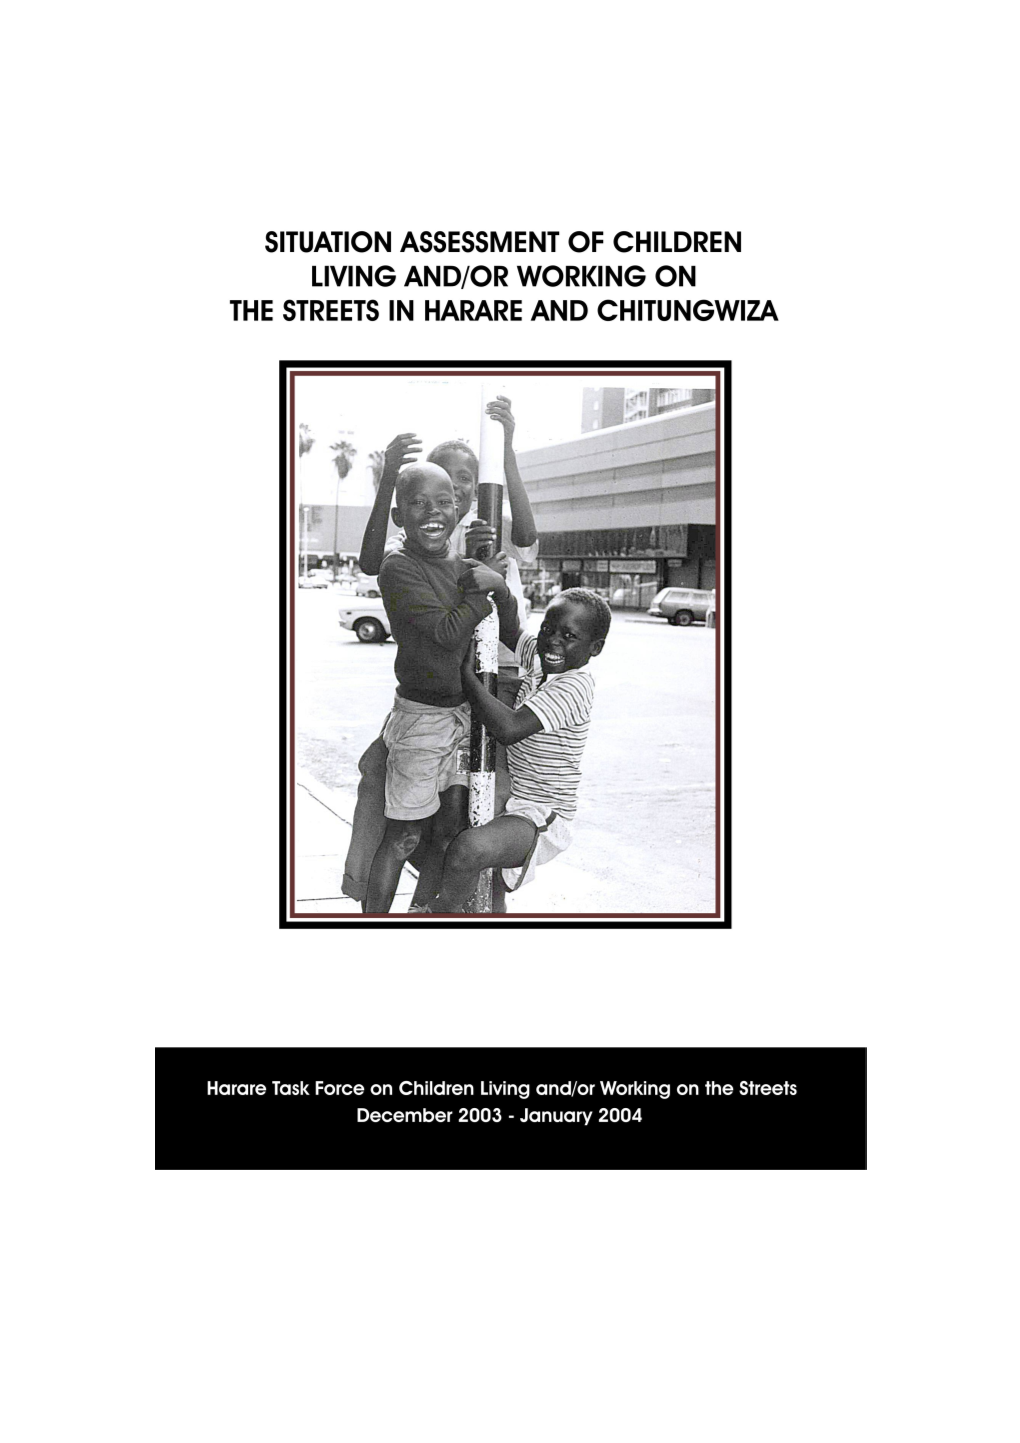 Situation Assessment of Children Living and Working on the Streets